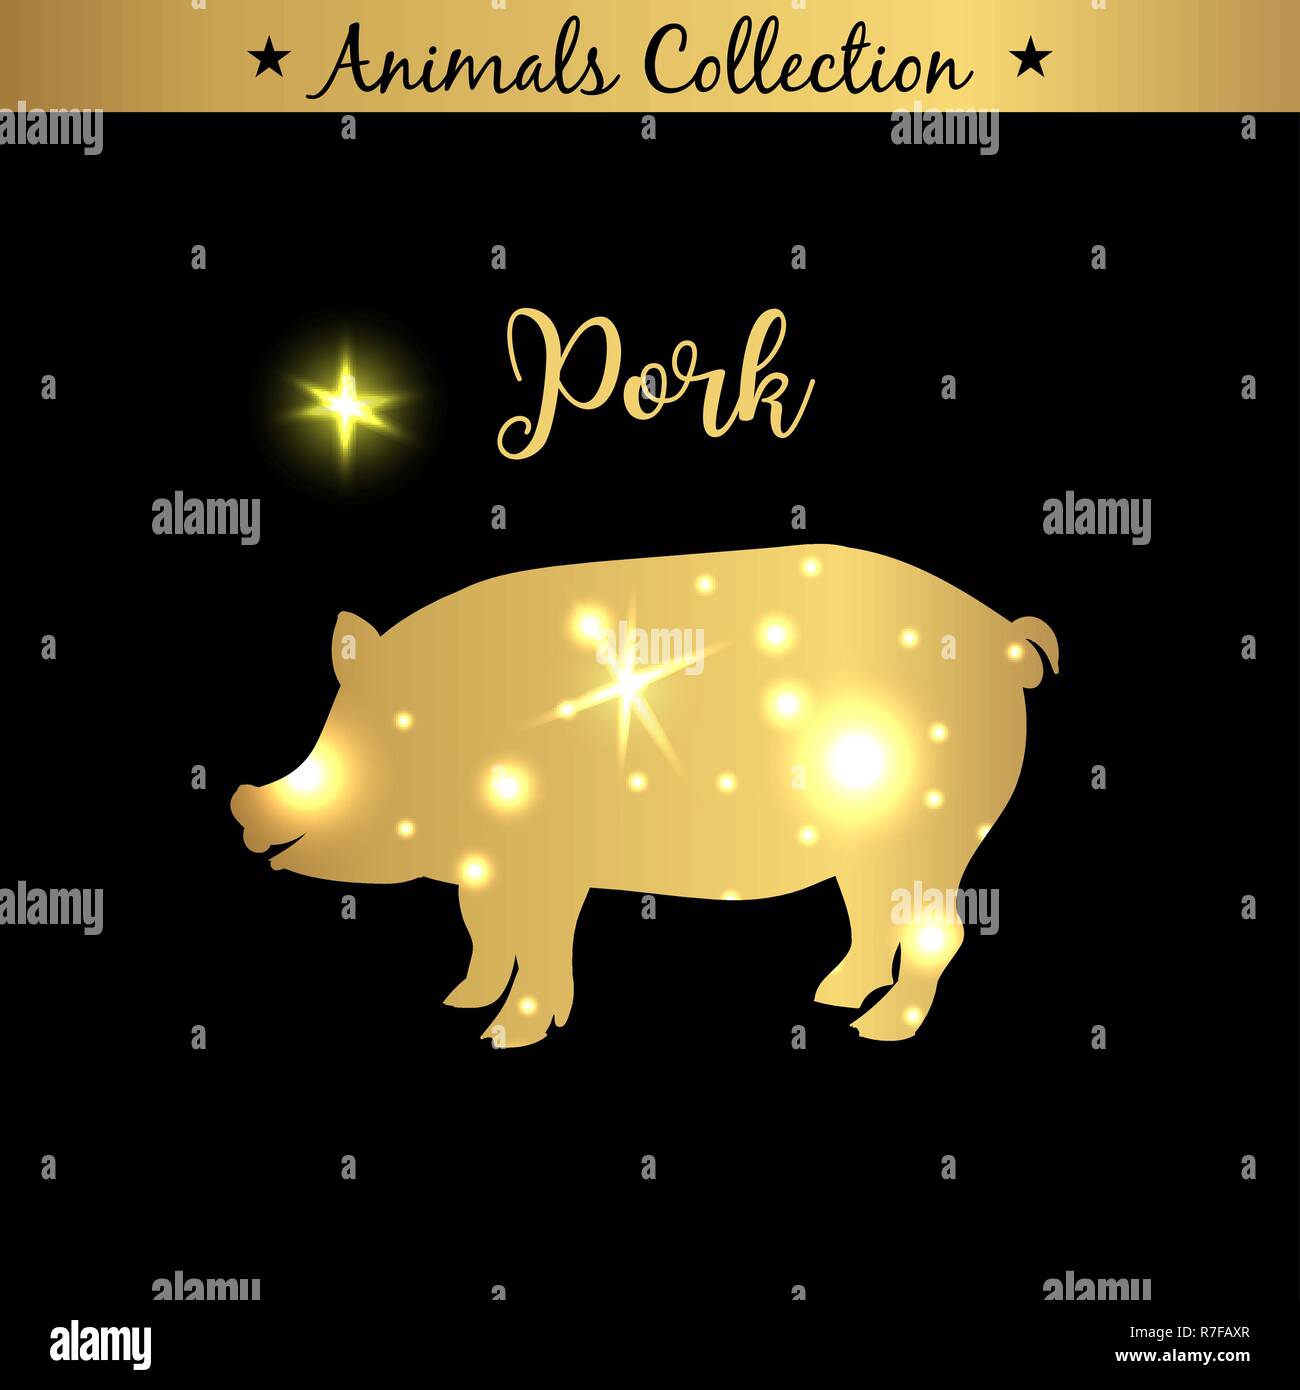 Isolated vintage golden and royal emblem of farm Pork animal. Pig or pork meat. Butchery products market. Golden silhouette with lights and lettering. Concept template for branding Stock Vector